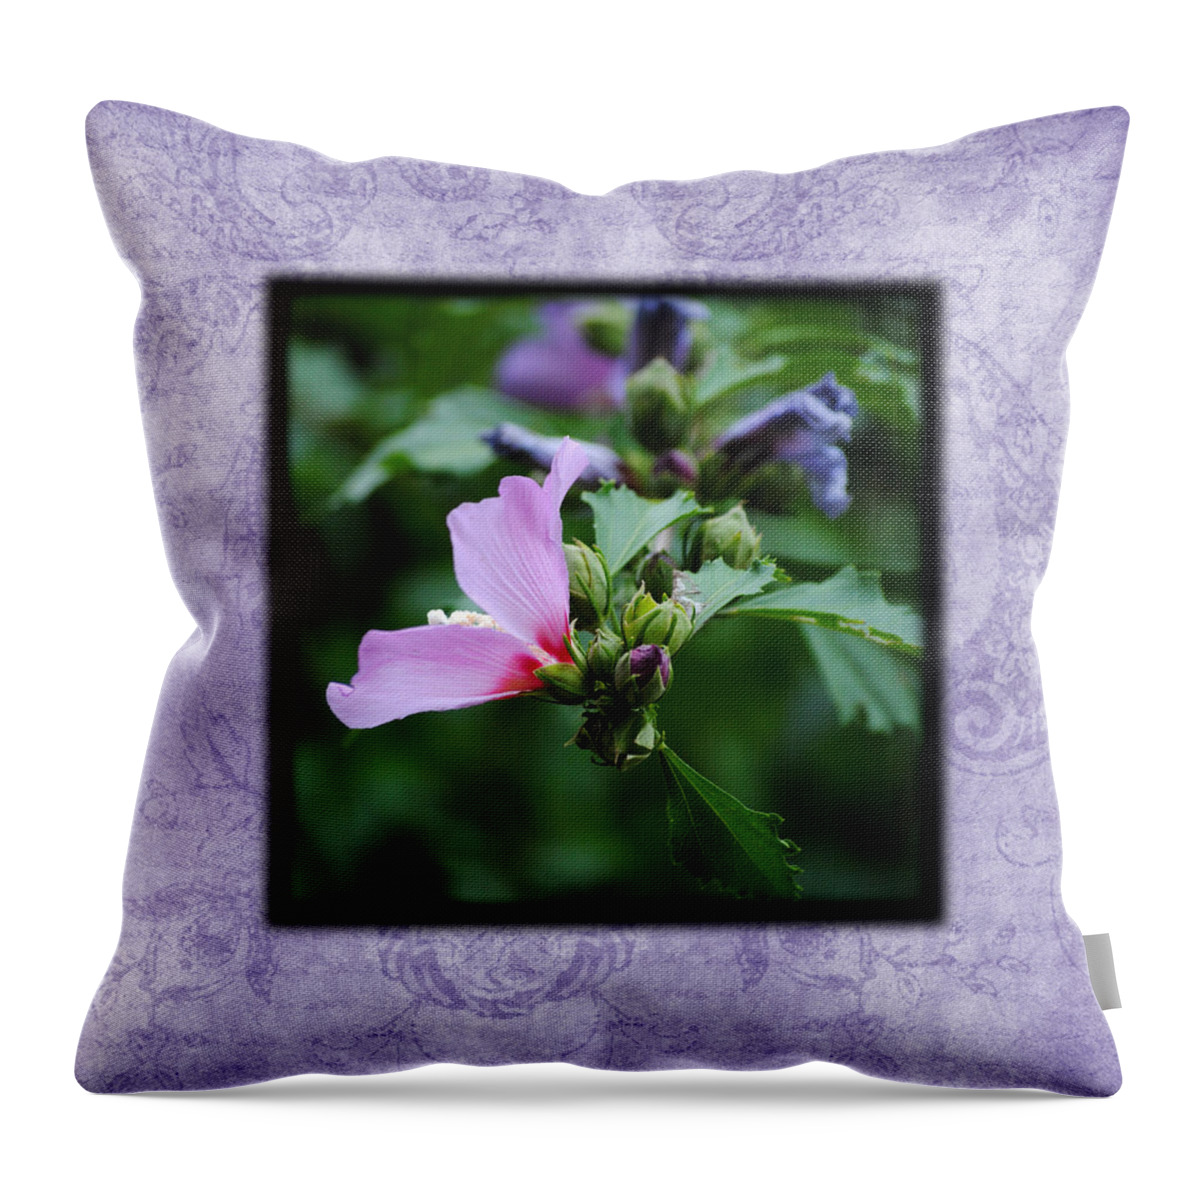 Hibiscus Throw Pillow featuring the photograph Hibiscus II Photo Square by Jai Johnson